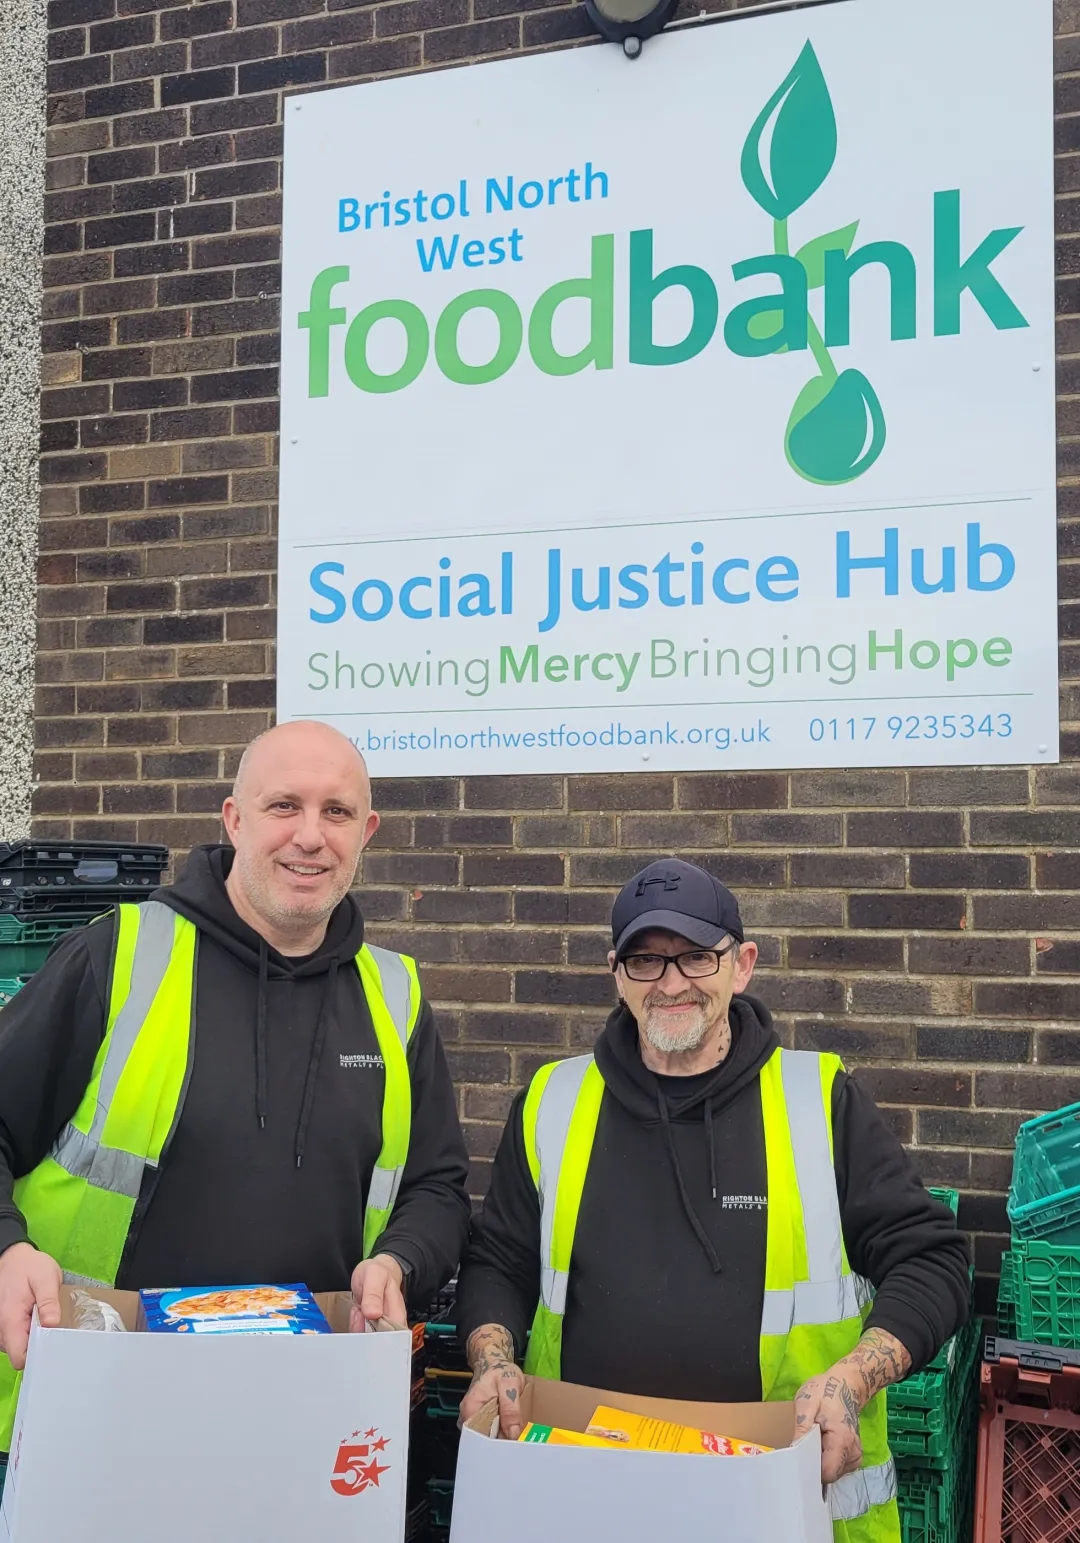 Matt Irwin and Richard Amos delivering supplies to the Bristol North West Foodbank